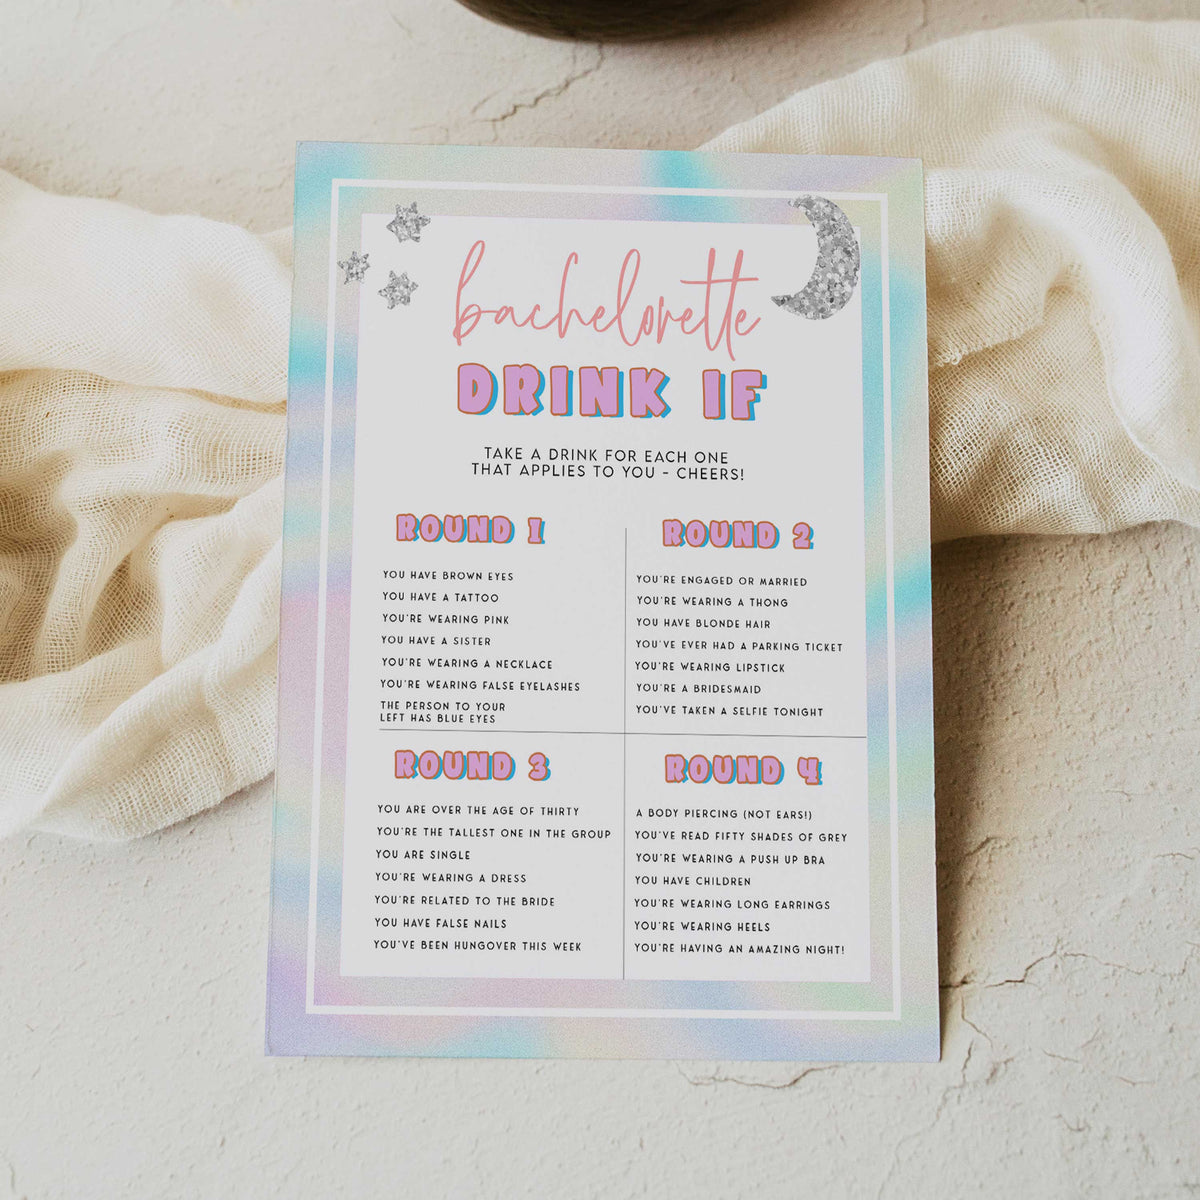 bachelorette drink if game, Space cowgirl bachelorette party games, printable bachelorette party games, dirty hen party games, adult party games, disco bachelorette games